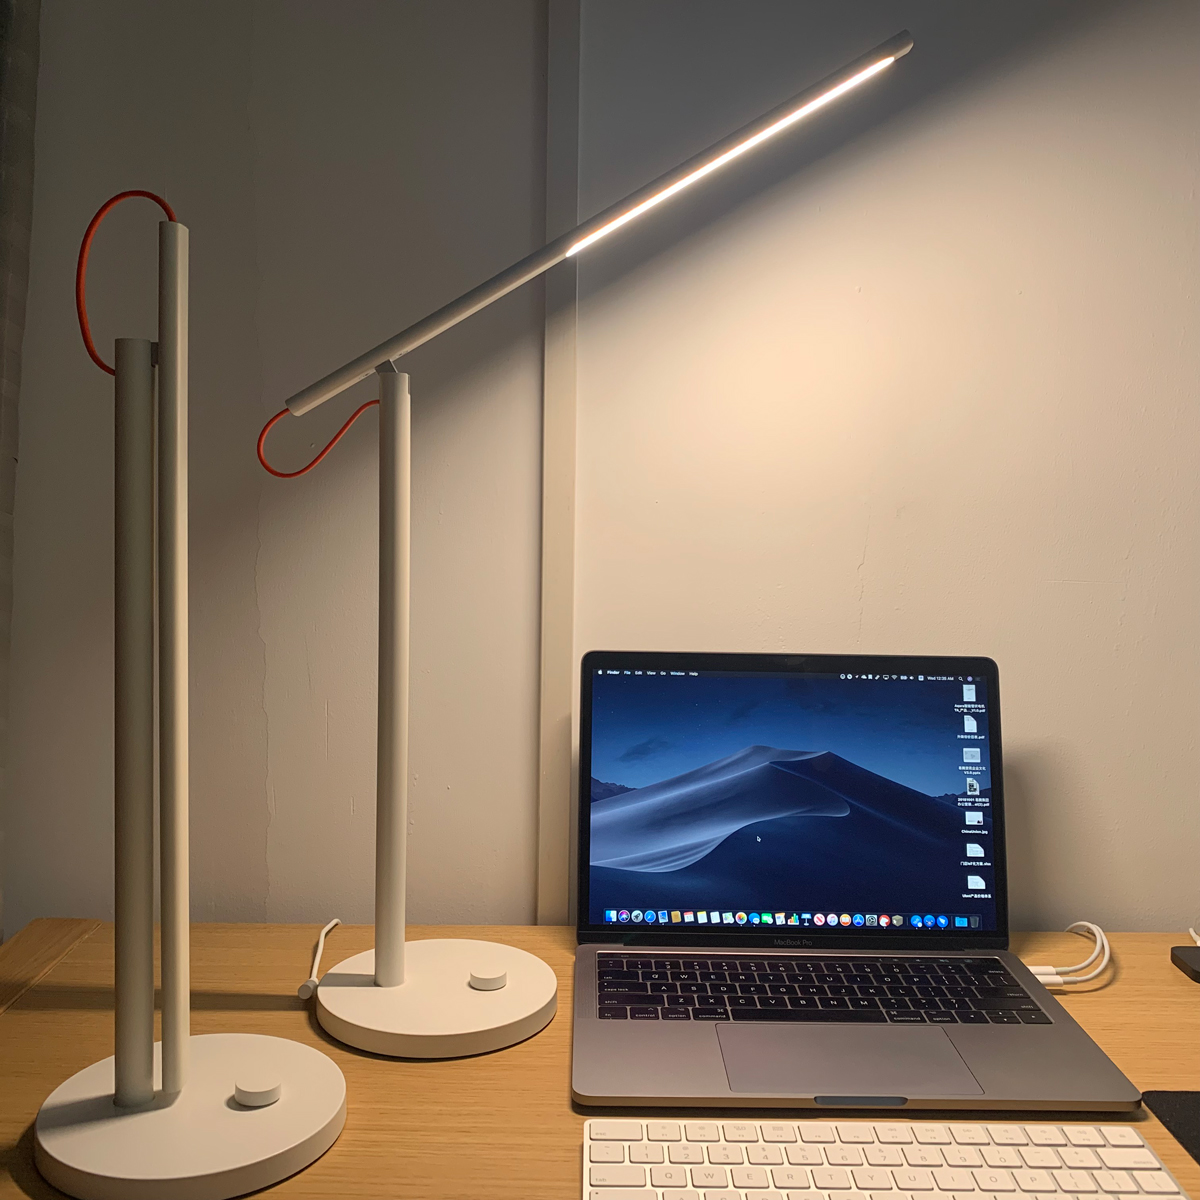 toast coil provoke Mi Desk Lamp 1S (review) – Homekit News and Reviews